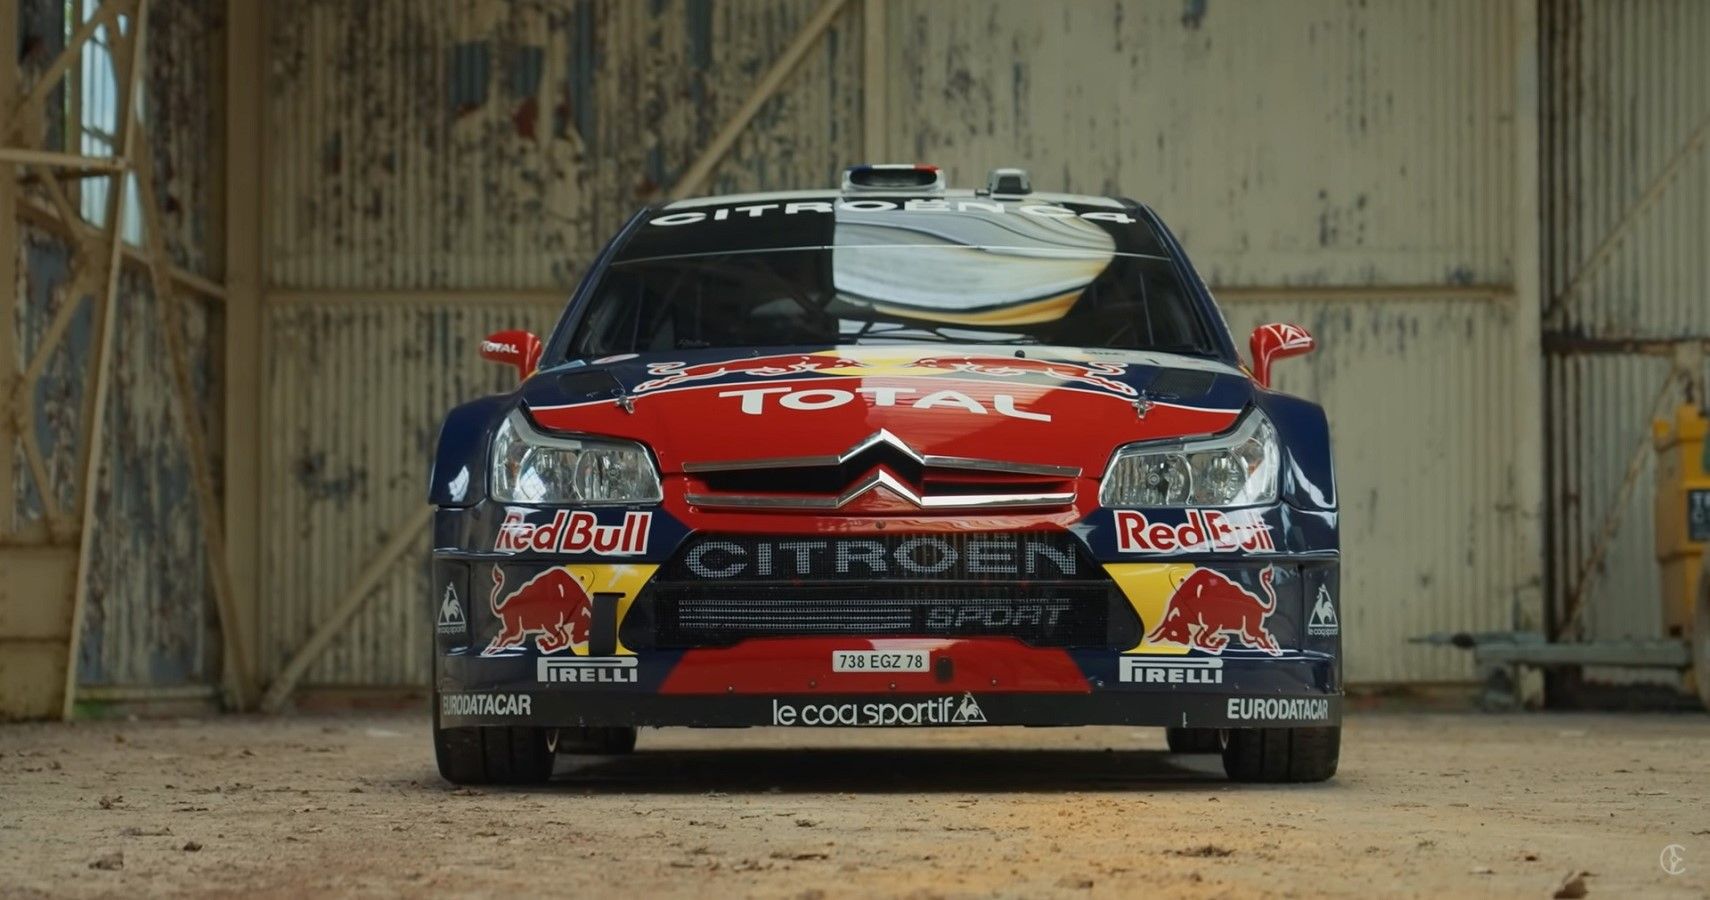 Citroen C4 WRC, red and blue with livery, front profile view in hangar